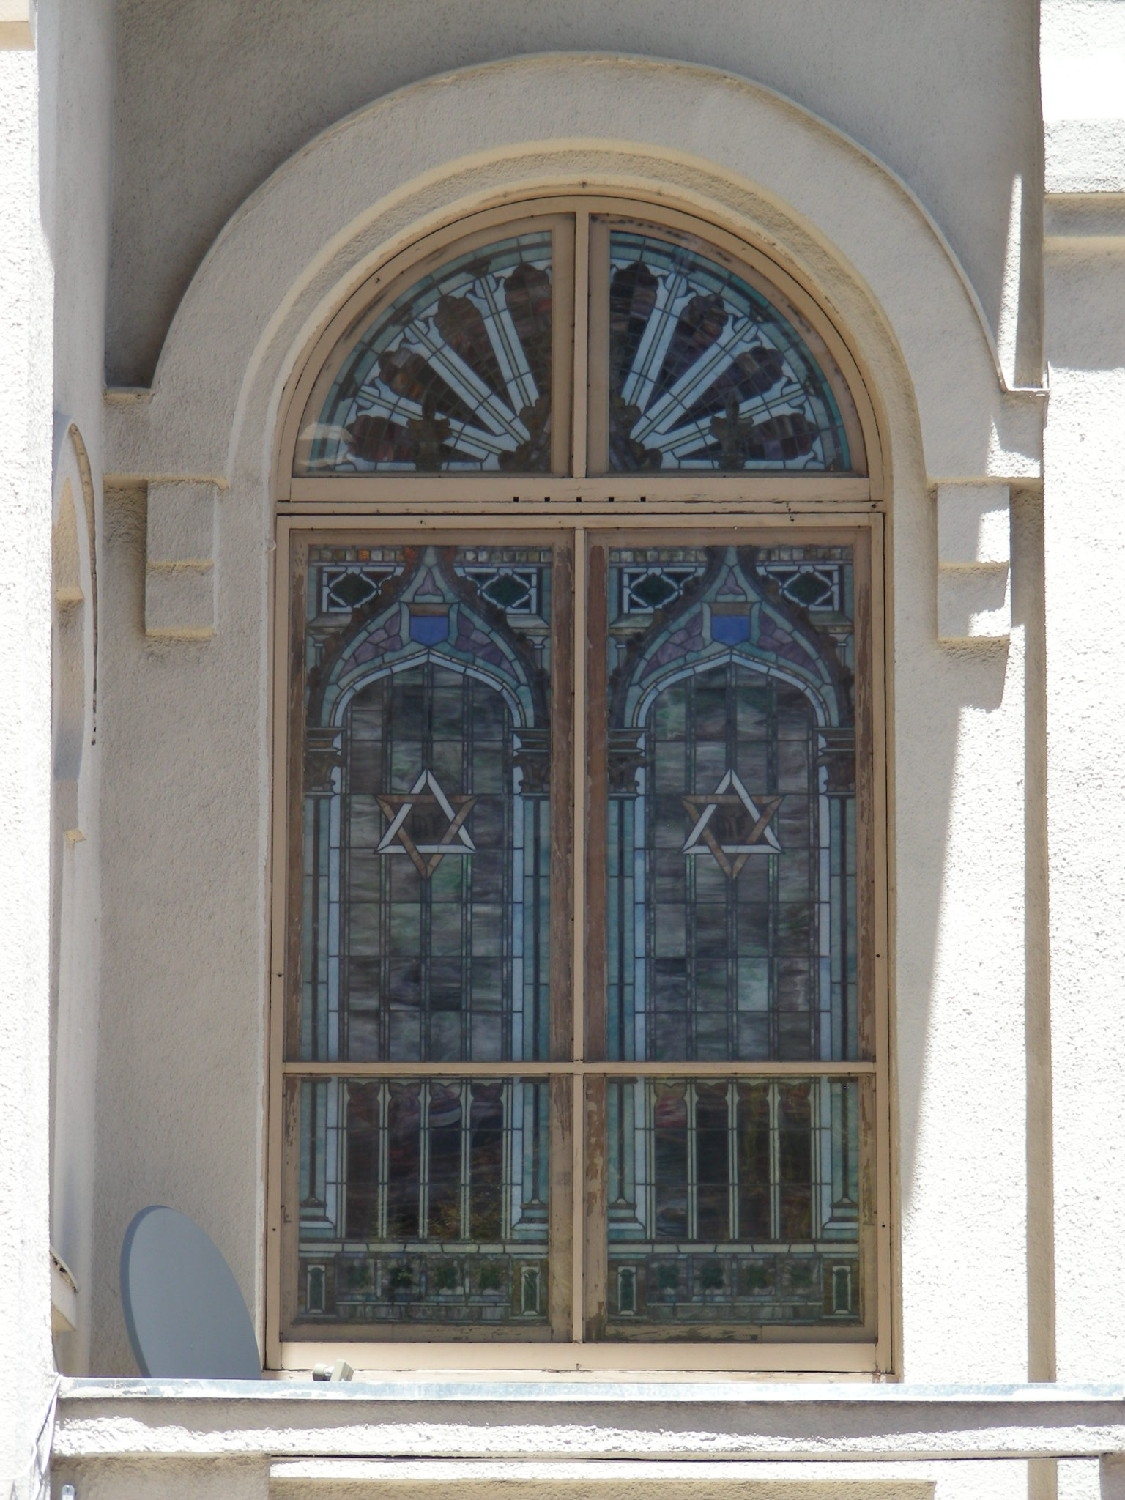 Exterior, detail of stained glass window